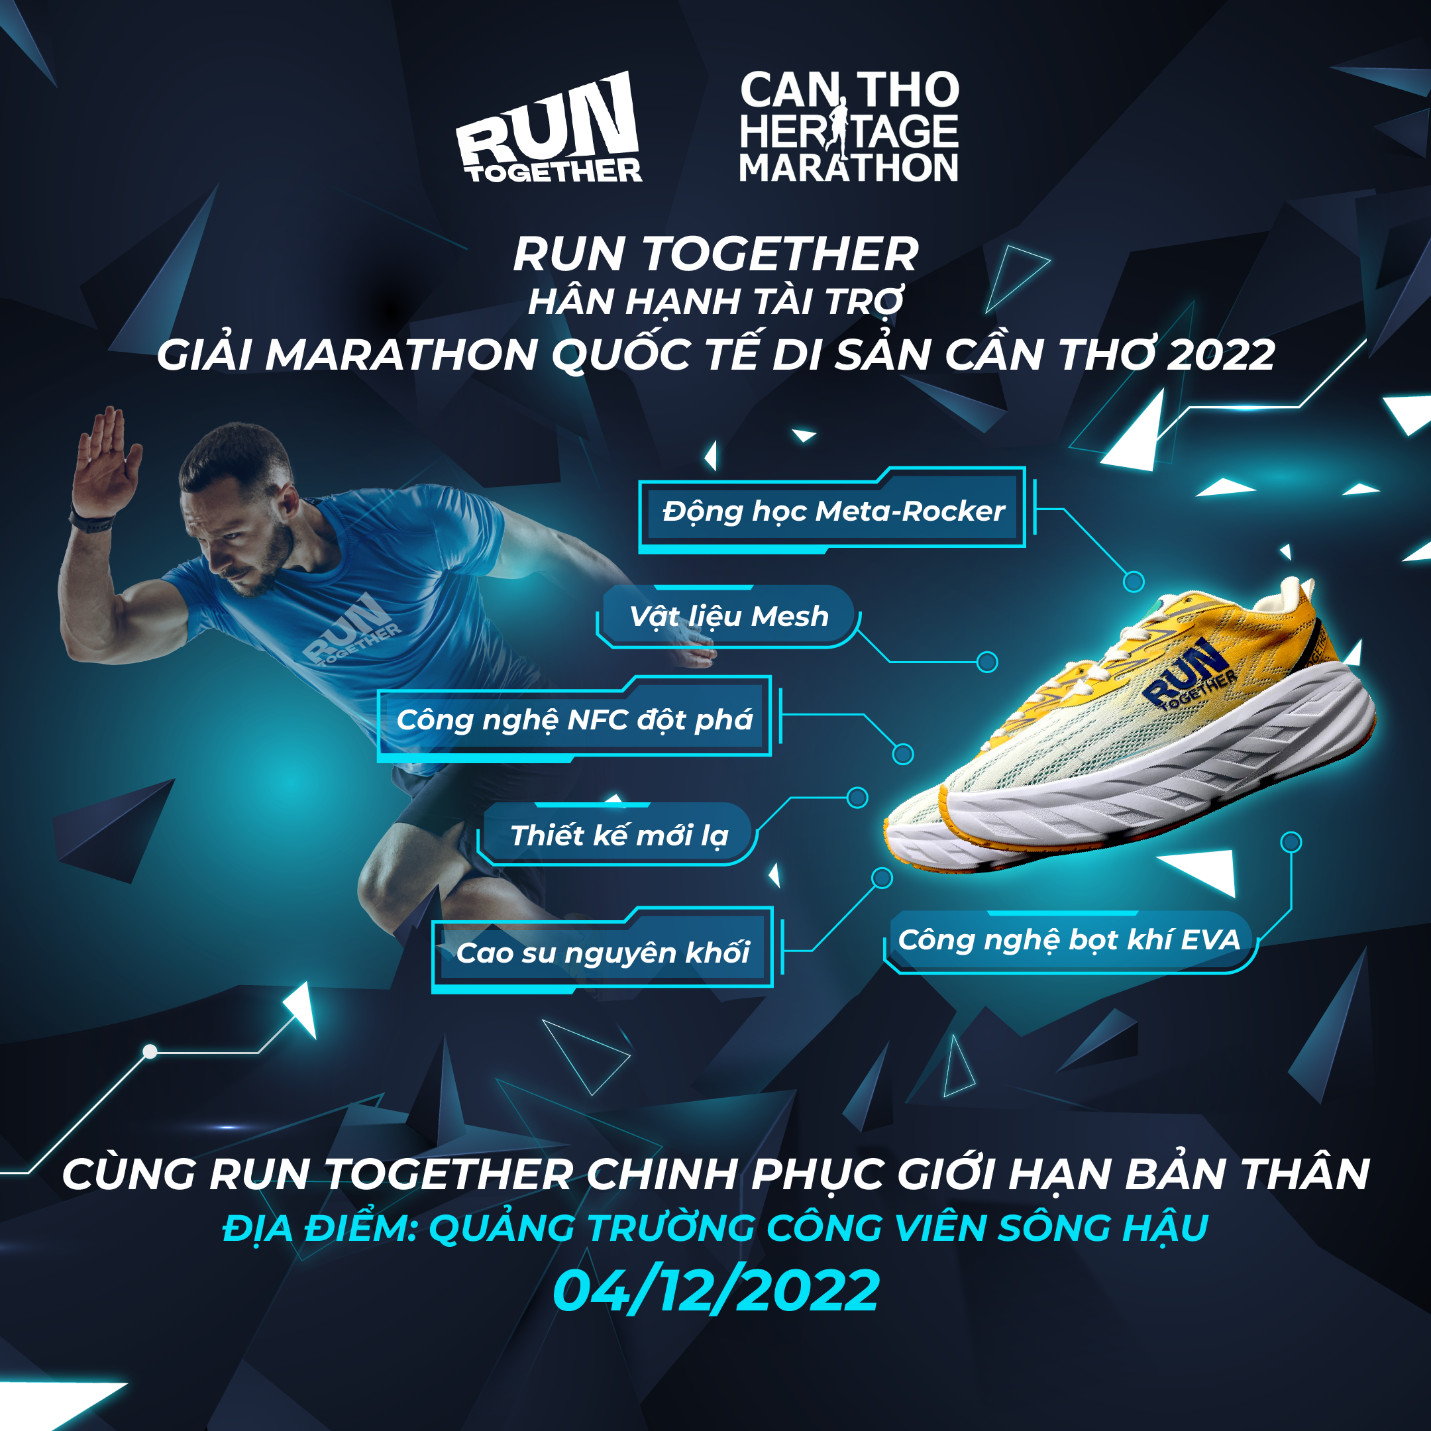 Run Together Sponsors Can Tho Marathon – A Heritage Race 2022